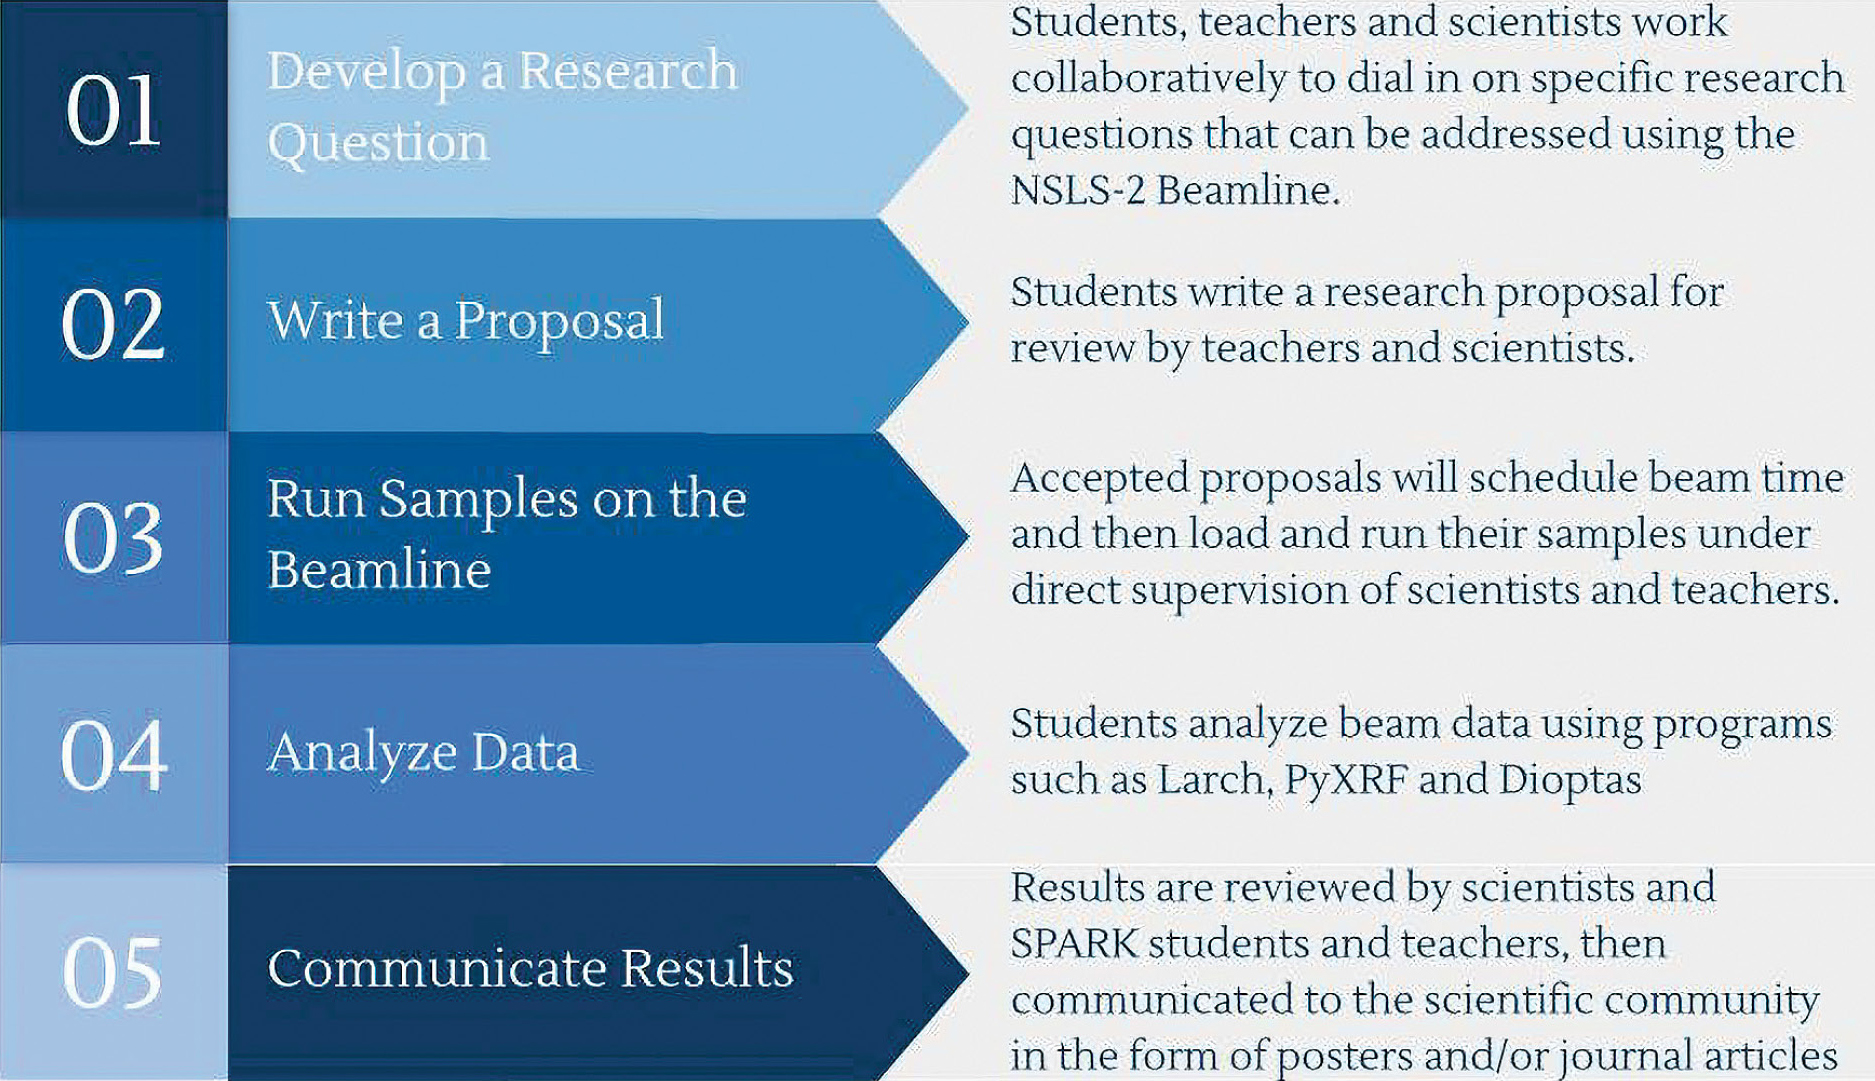 Figure 5. Timeline of collaborative research procedures. Image courtesy of Dianna Gobler.